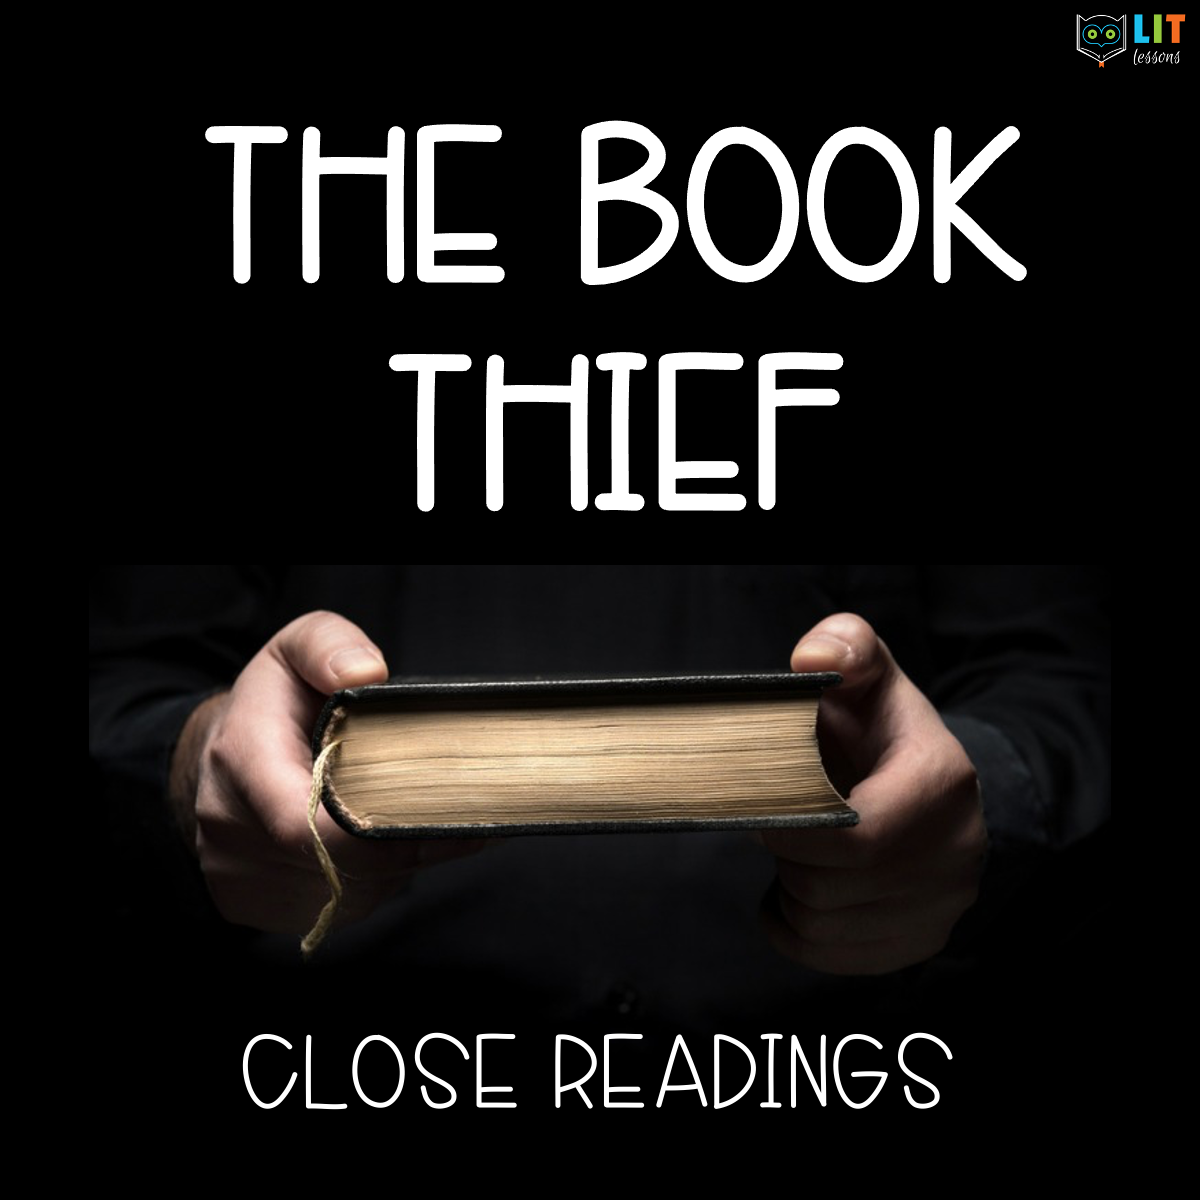 The Book Thief Close Readings